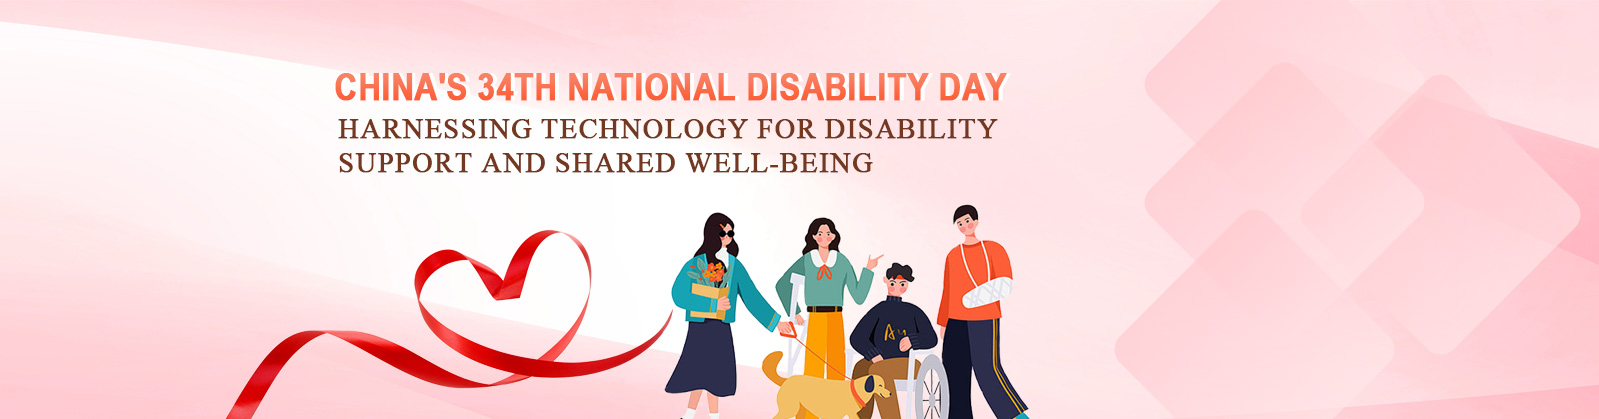  The 34th national day of assisting disabled persons